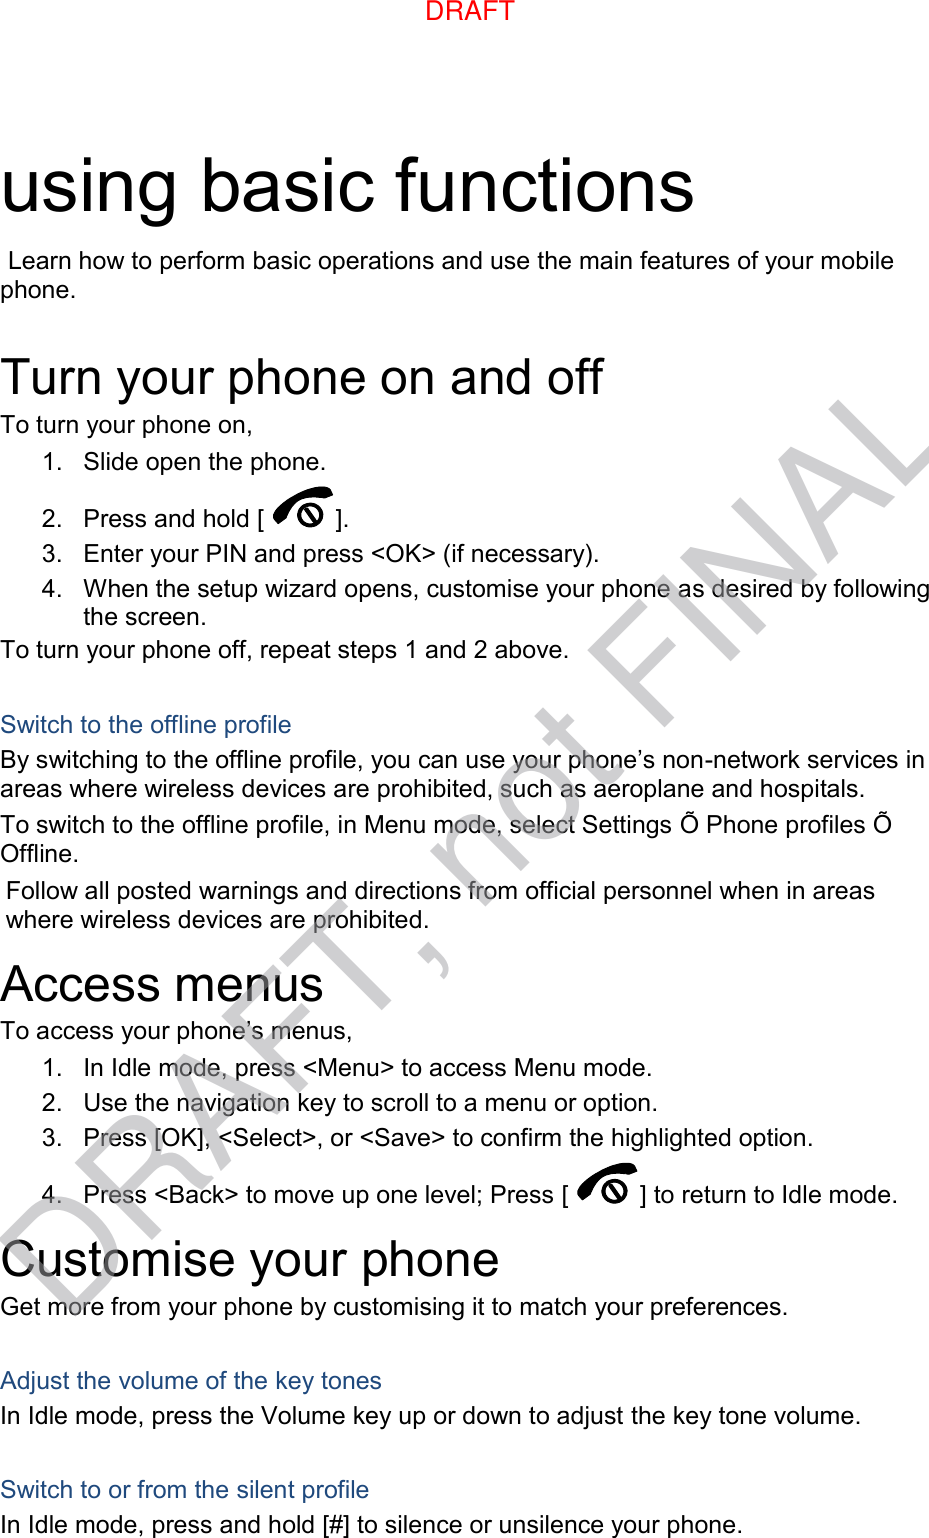 using basic functions  Learn how to perform basic operations and use the main features of your mobile phone.    Turn your phone on and off To turn your phone on, 1.  Slide open the phone. 2.  Press and hold [ ]. 3.  Enter your PIN and press &lt;OK&gt; (if necessary). 4.  When the setup wizard opens, customise your phone as desired by following the screen. To turn your phone off, repeat steps 1 and 2 above.  Switch to the offline profile By switching to the offline profile, you can use your phone’s non-network services in areas where wireless devices are prohibited, such as aeroplane and hospitals. To switch to the offline profile, in Menu mode, select Settings Õ Phone profiles Õ Offline. Follow all posted warnings and directions from official personnel when in areas where wireless devices are prohibited. Access menus To access your phone’s menus, 1.  In Idle mode, press &lt;Menu&gt; to access Menu mode. 2.  Use the navigation key to scroll to a menu or option. 3.  Press [OK], &lt;Select&gt;, or &lt;Save&gt; to confirm the highlighted option. 4.  Press &lt;Back&gt; to move up one level; Press [ ] to return to Idle mode. Customise your phone Get more from your phone by customising it to match your preferences.  Adjust the volume of the key tones In Idle mode, press the Volume key up or down to adjust the key tone volume.  Switch to or from the silent profile In Idle mode, press and hold [#] to silence or unsilence your phone. DRAFTDRAFT, not FINAL